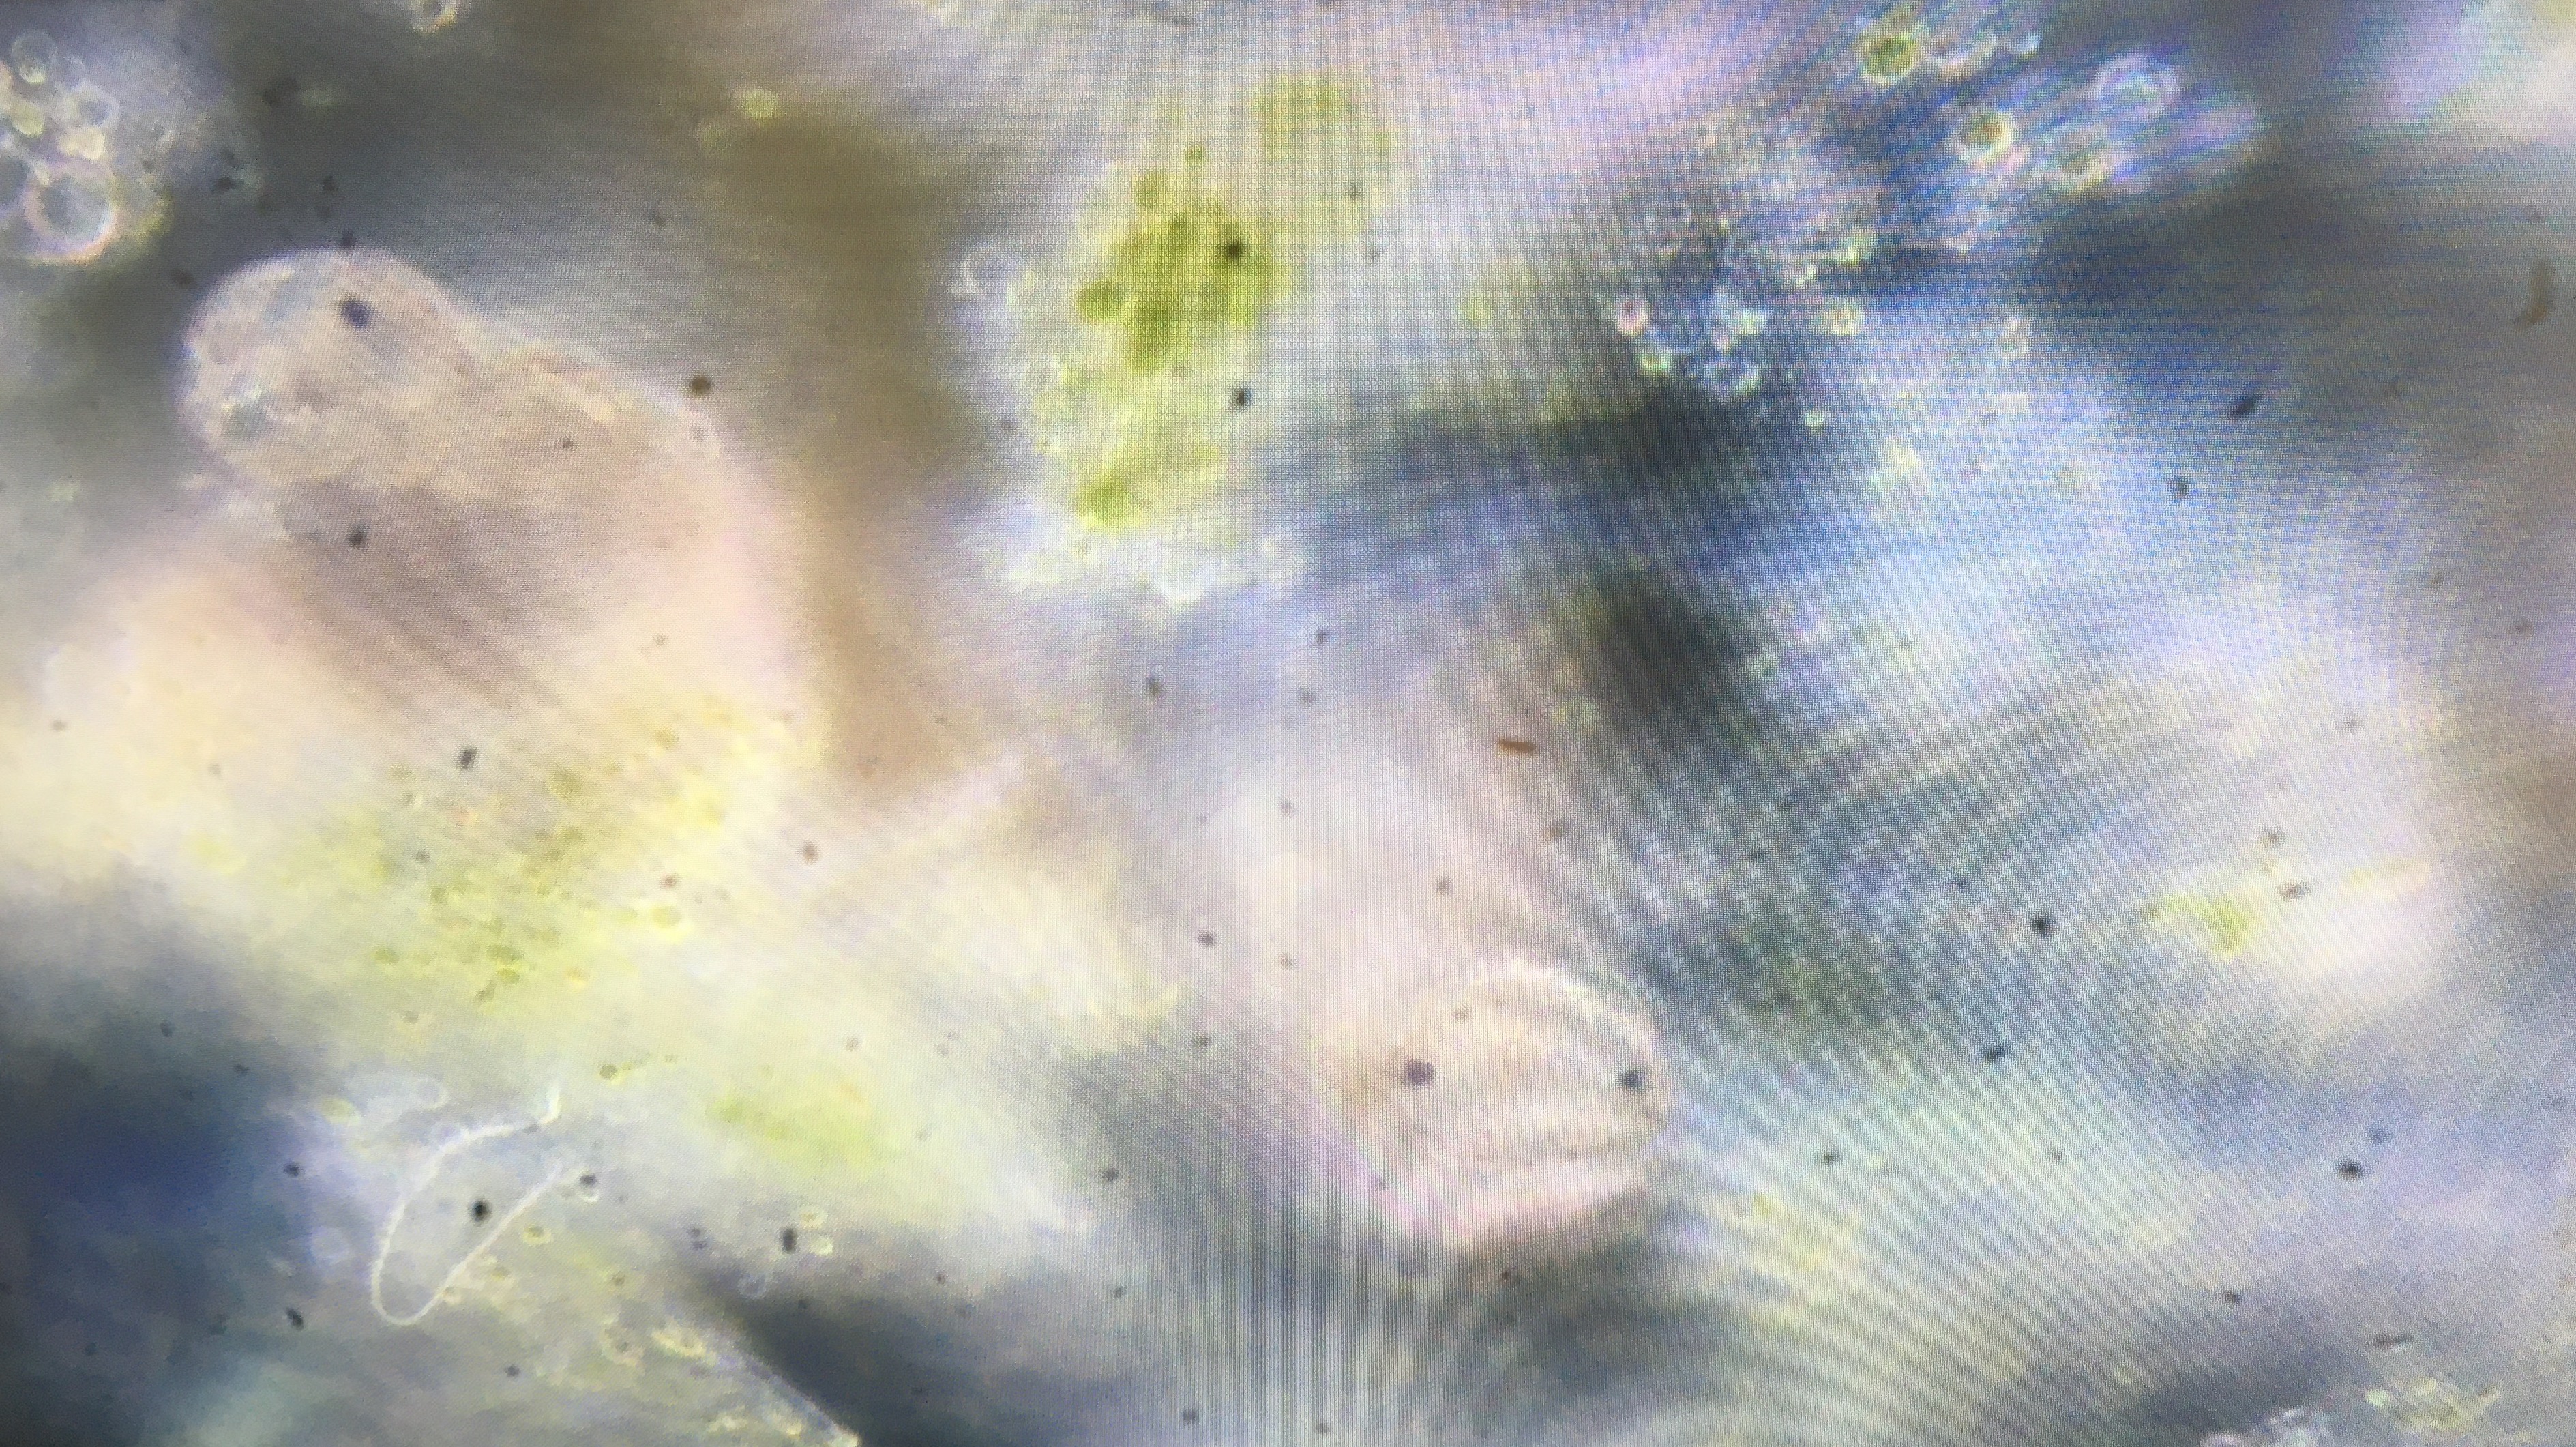 An image of two tardigrades from Brandon Marsh pond